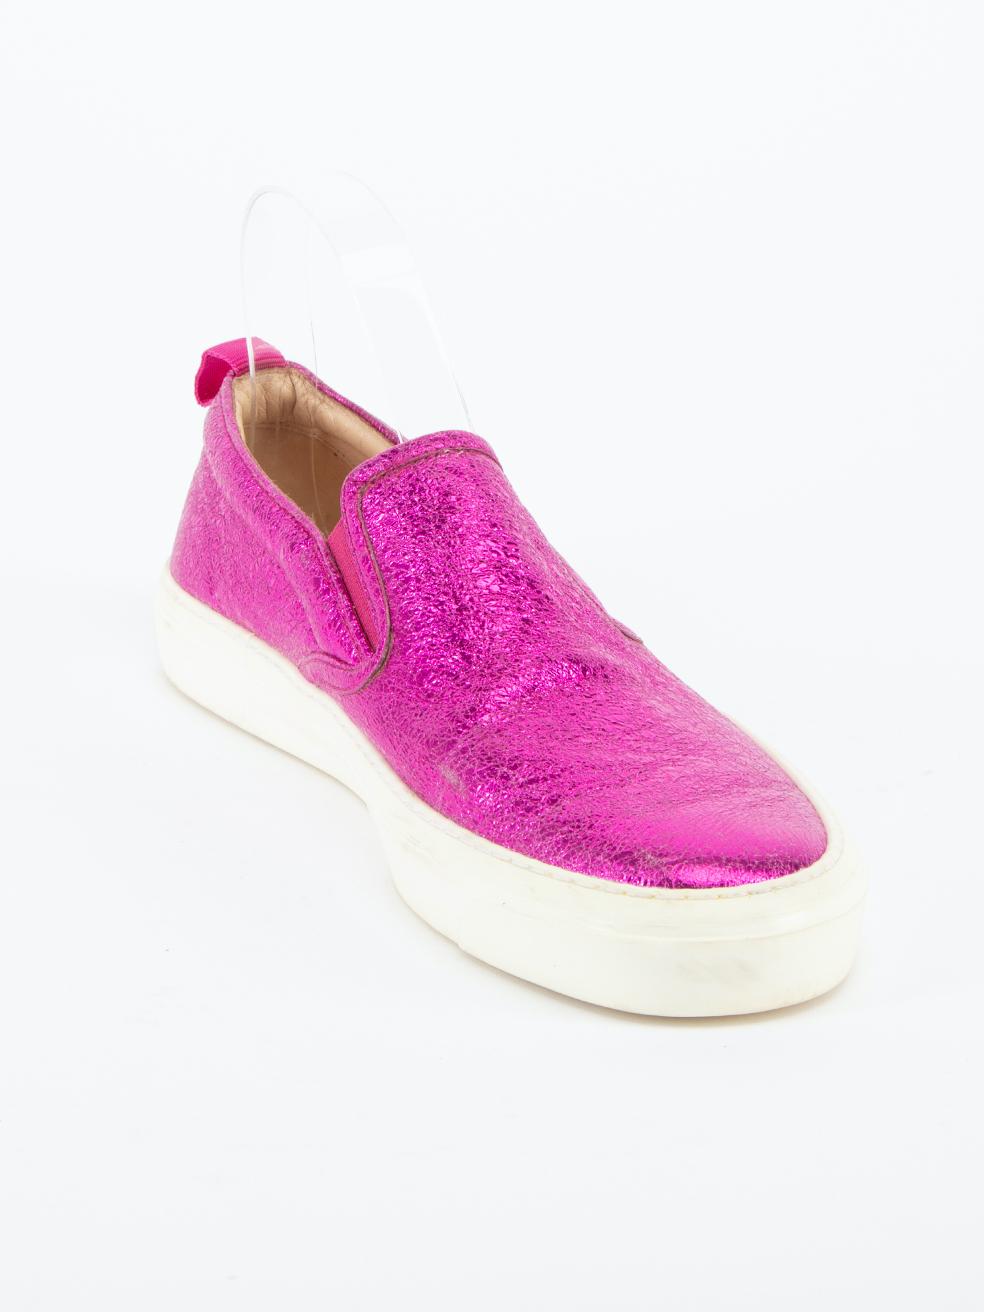 CONDITION is Very good. Minimal wear to loafers is evident. Minimal wear to the midsole which is scuffed and there is wear and cracks to the metallic exterior on this used Gucci designer resale item. 
 
 Details
  Metallic pink
 Leather
 Slip on